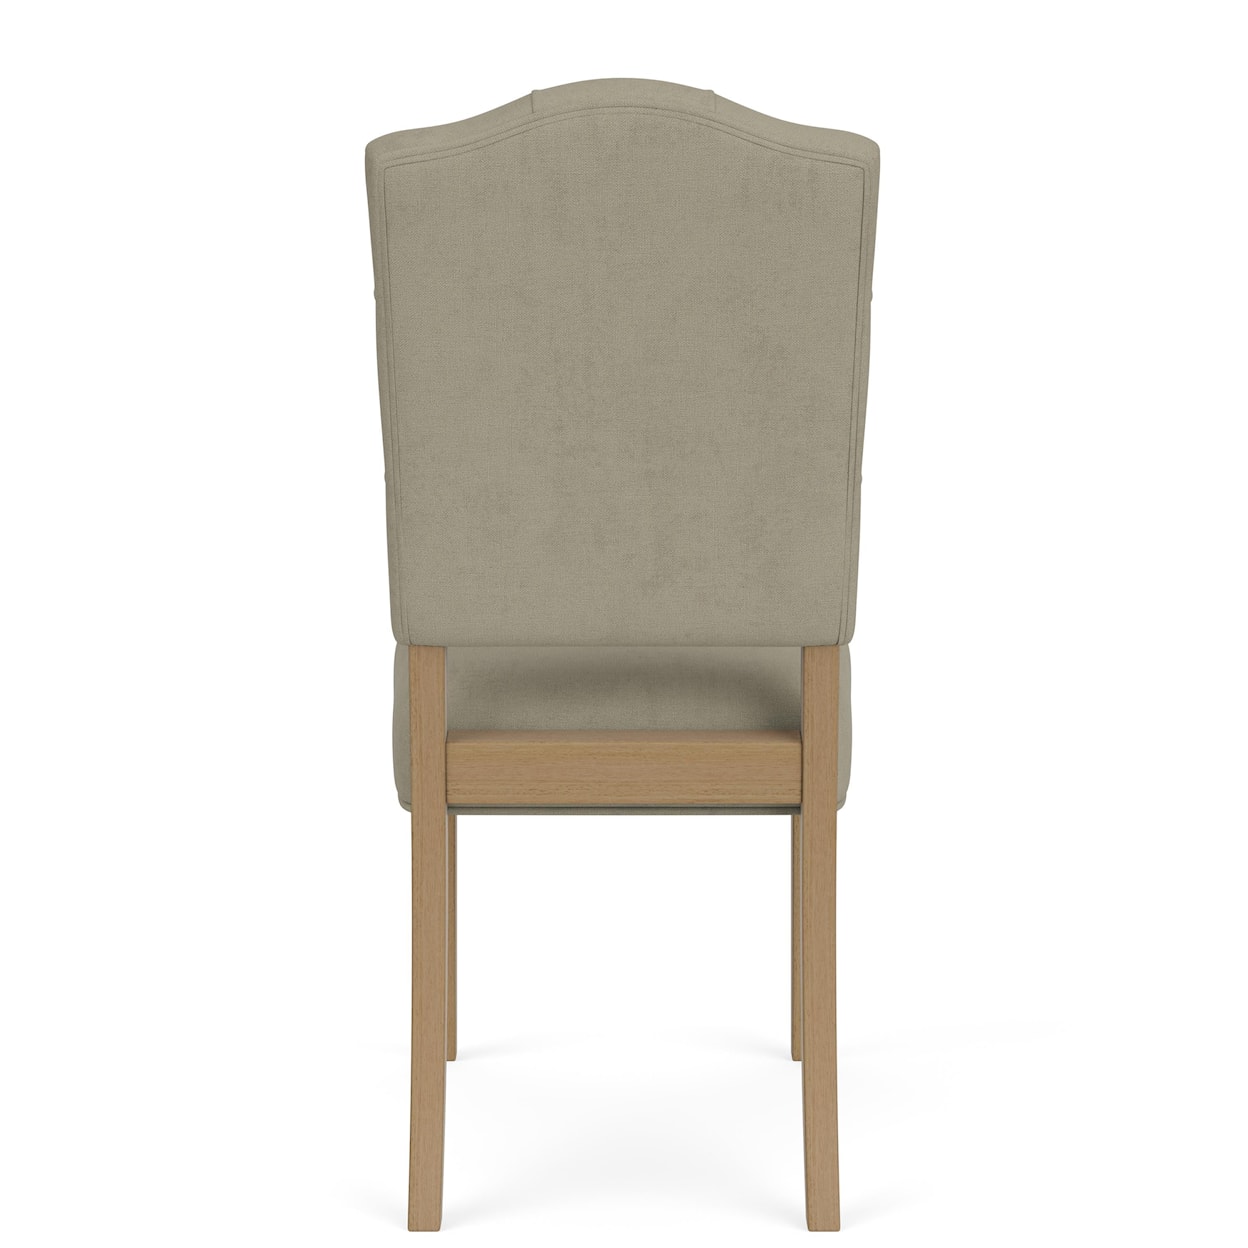 Riverside Furniture Mix-N-Match Chairs Upholstered Dining Side Chair